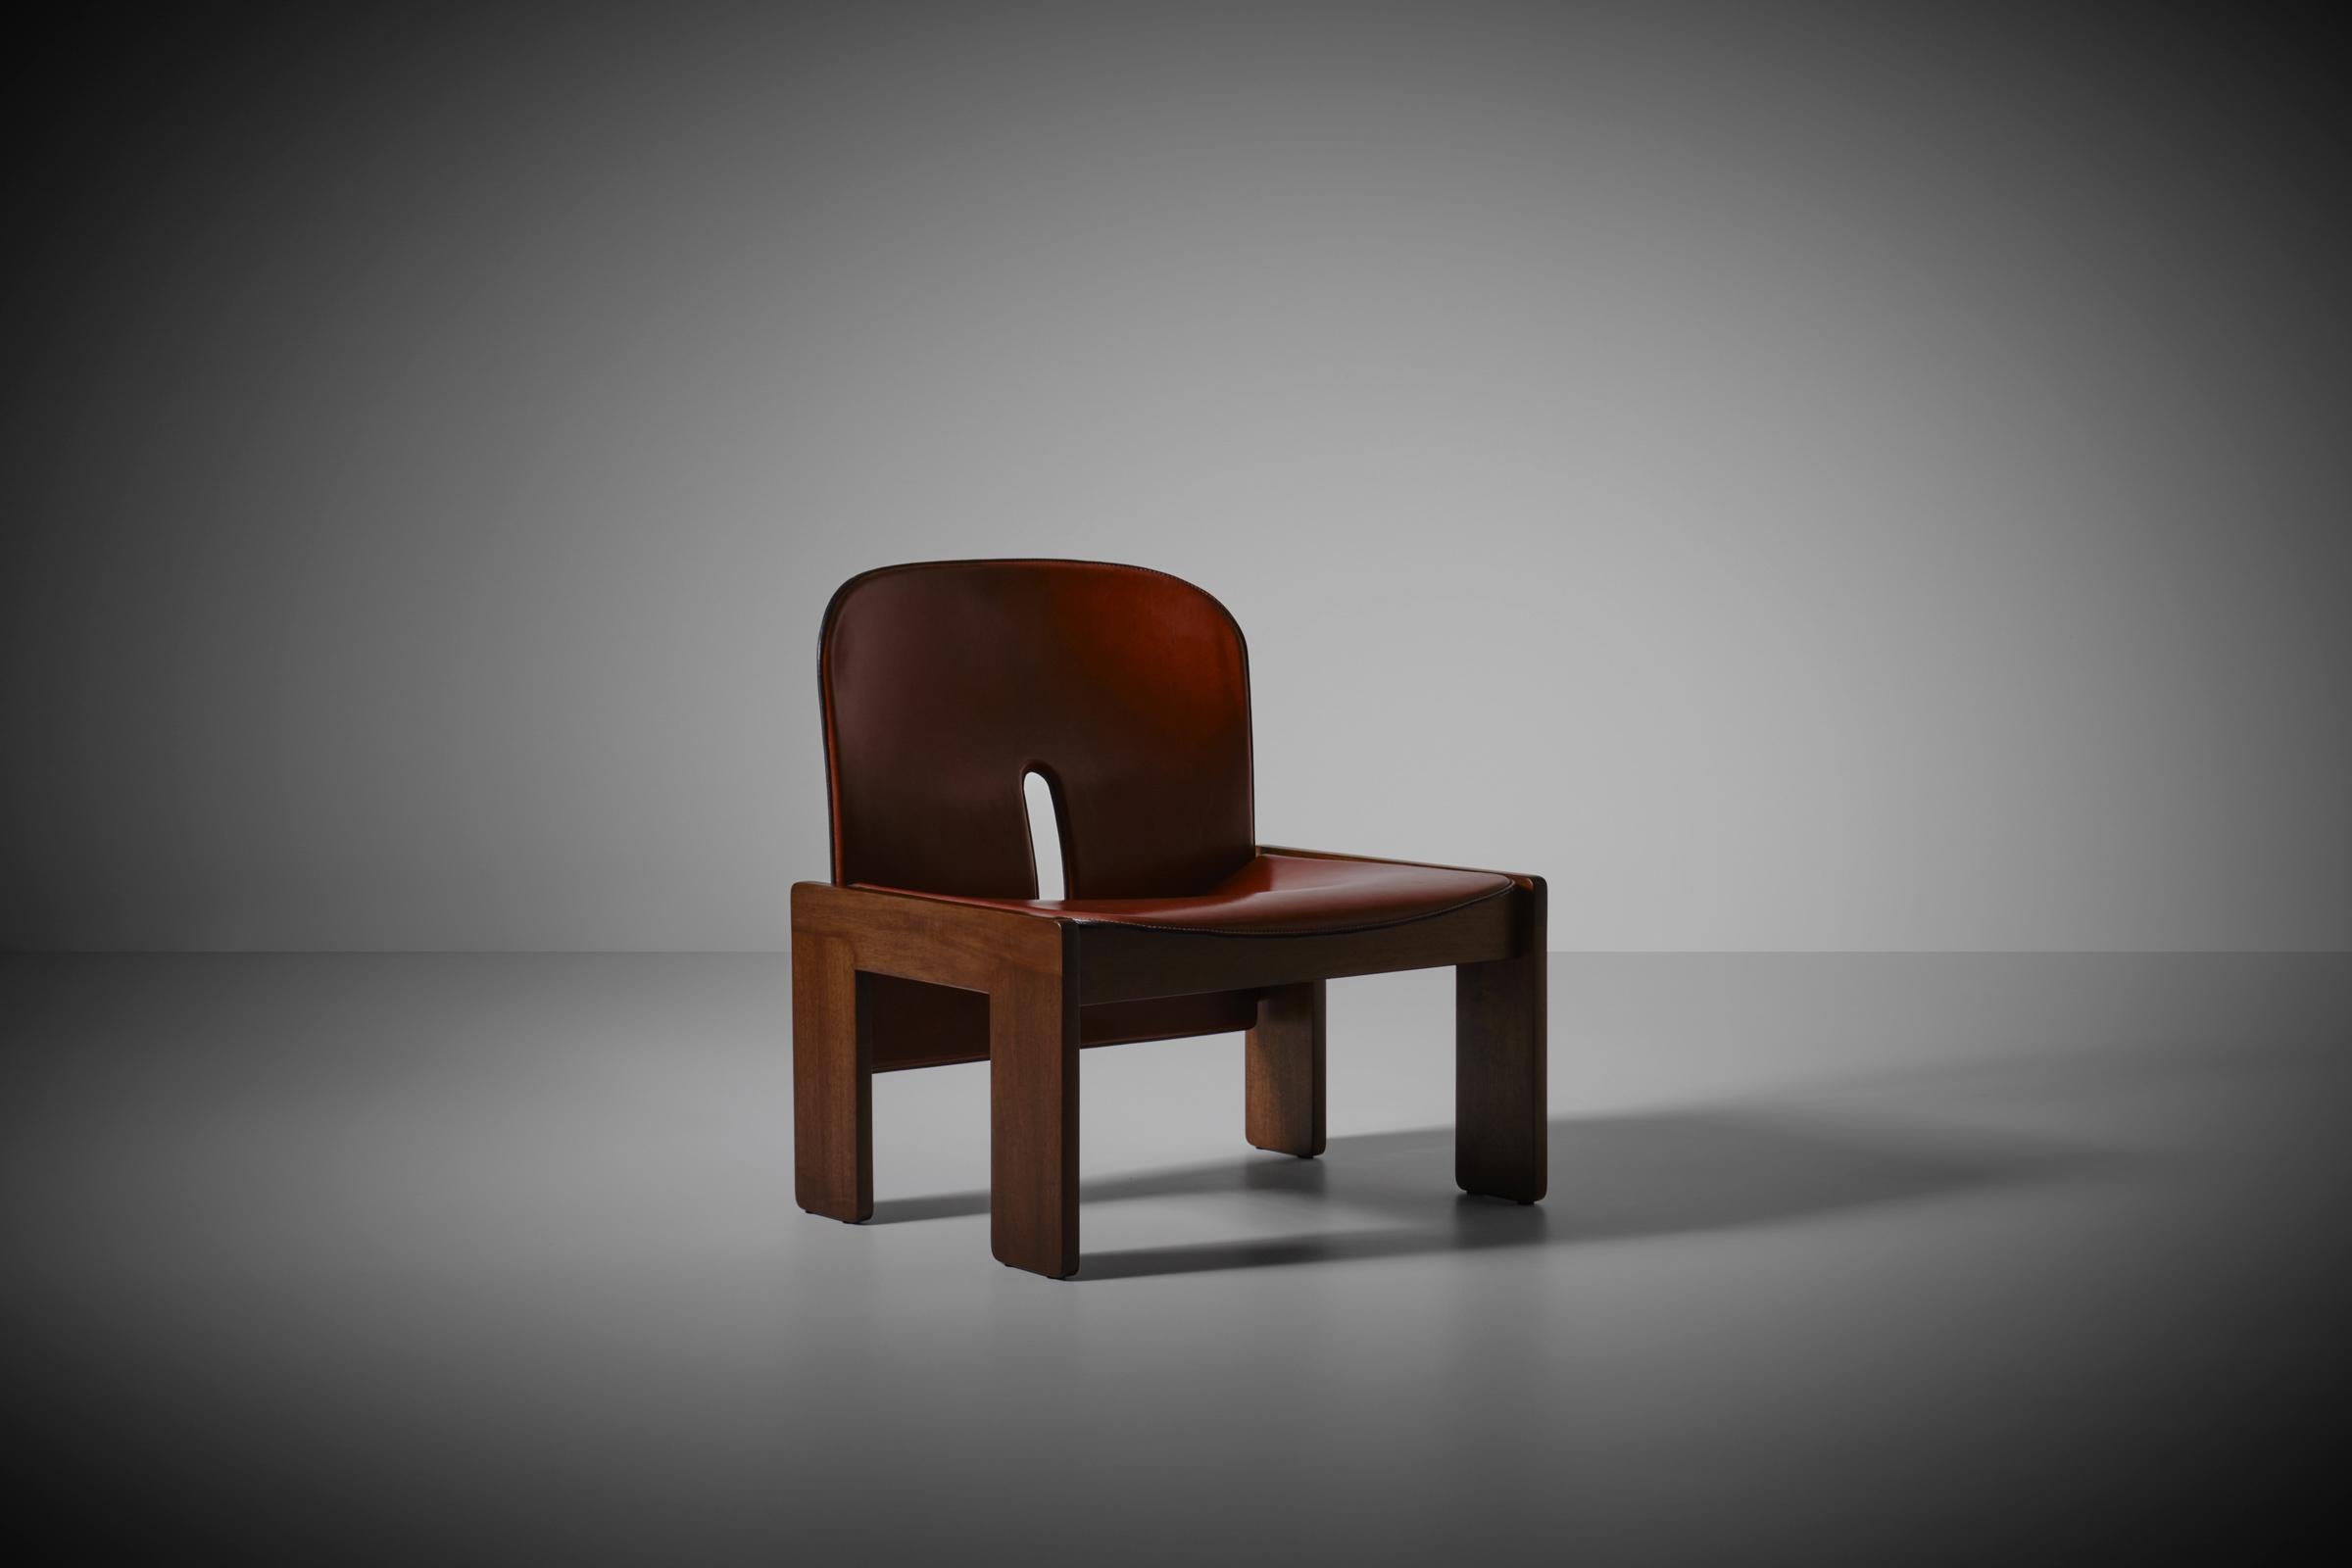 Afra & Tobia Scarpa mod. '925’ easy chair for Cassina, Italy 1966. Beautiful example made out of nice dark warm colored walnut and ox blood red leather. The chair is inspired by a sketch made in 1943 by the famous father of Tobia, architect Carlo